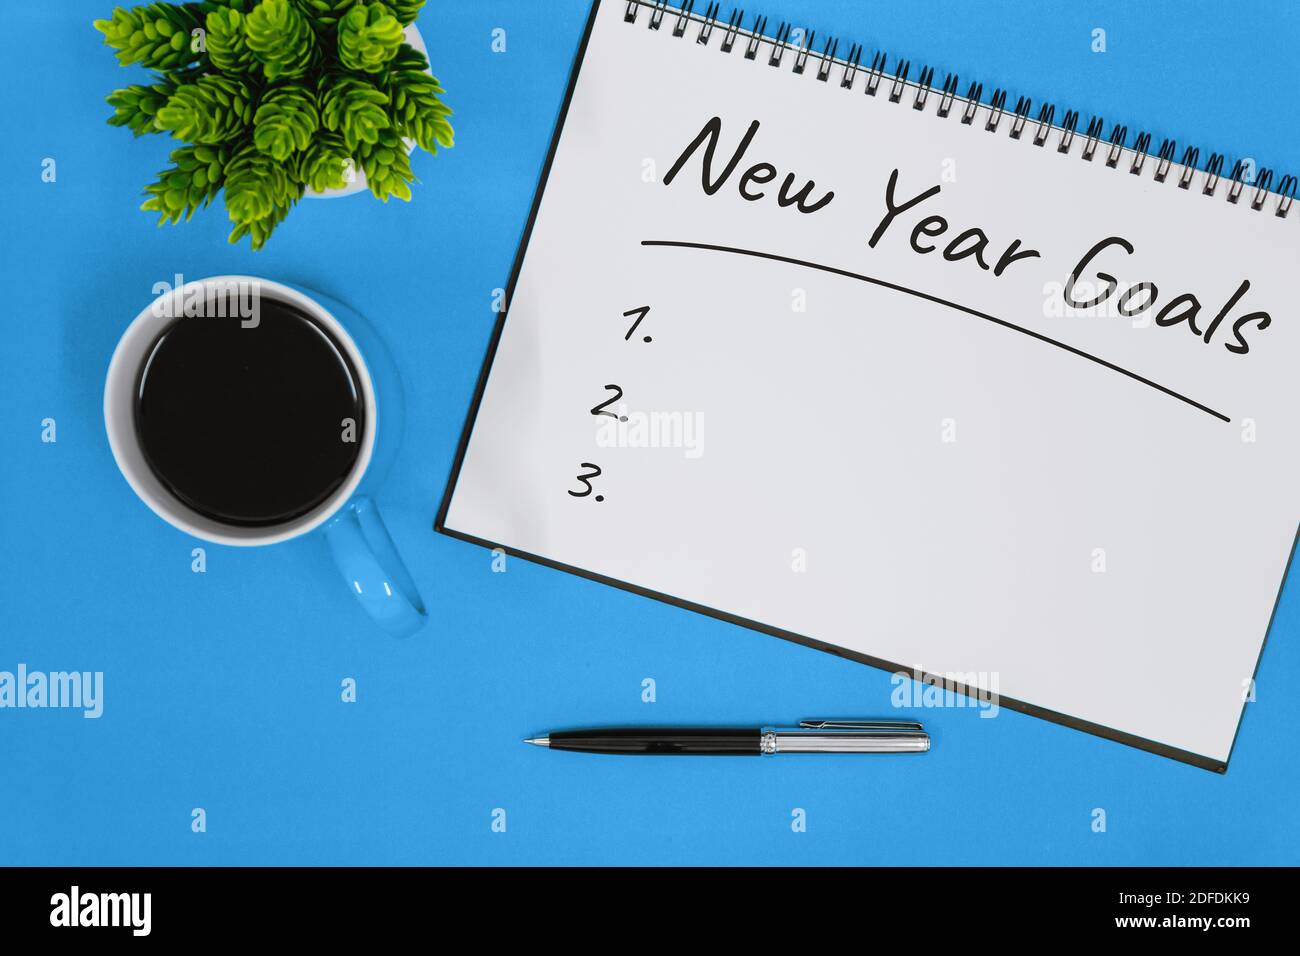 New Year Goals List on Notebook Stock Photo